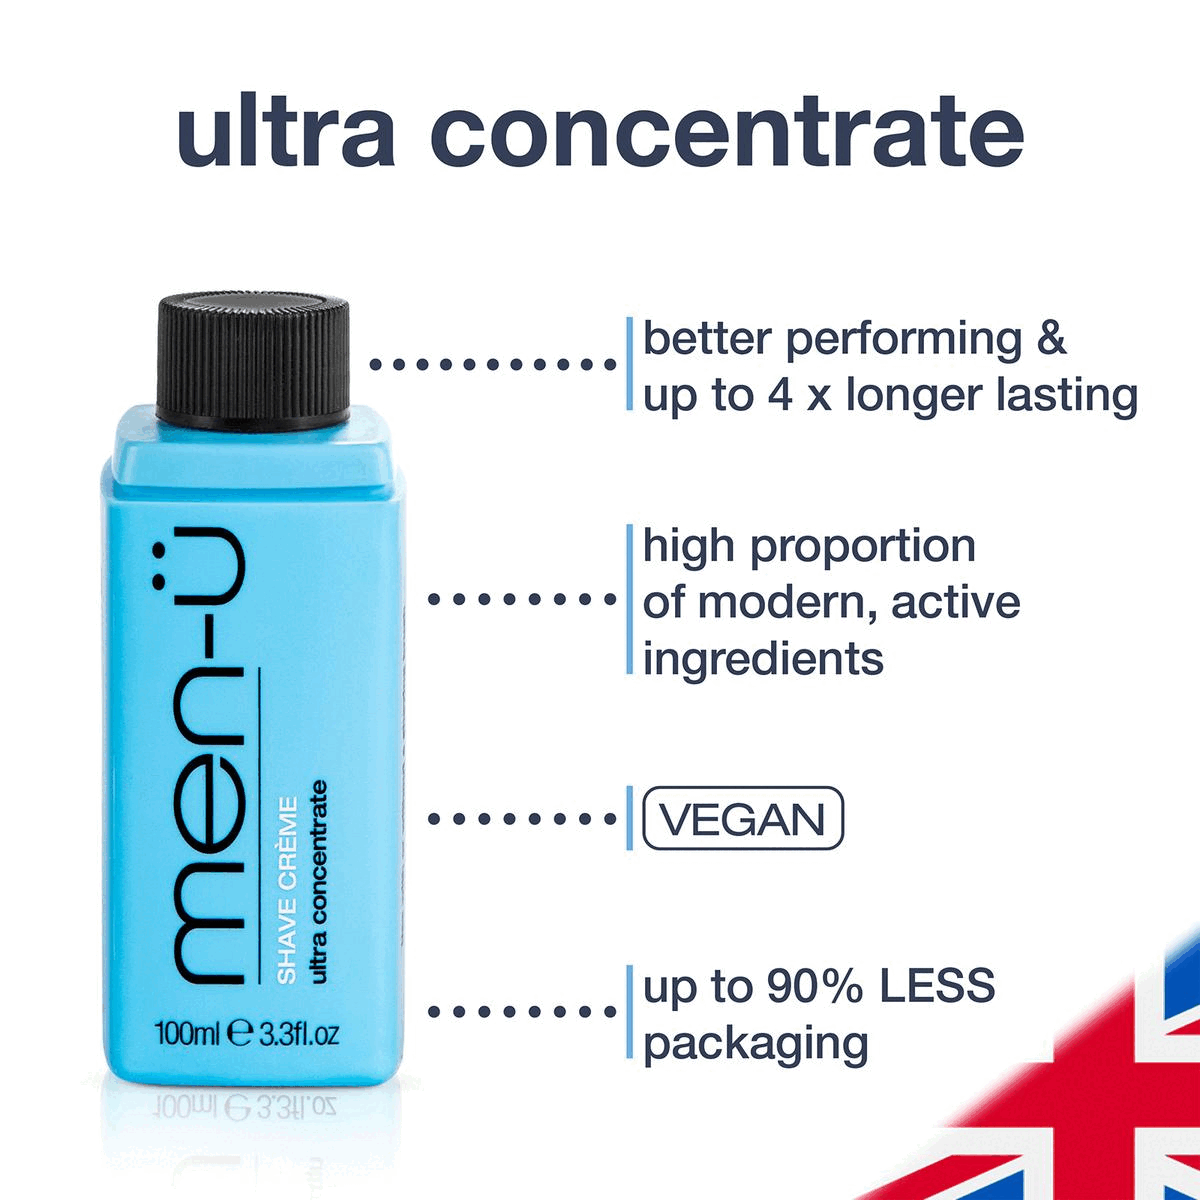 Ultra concentrate Benefits.Directions on how to use.Product Packaging.Moisturiser benefits